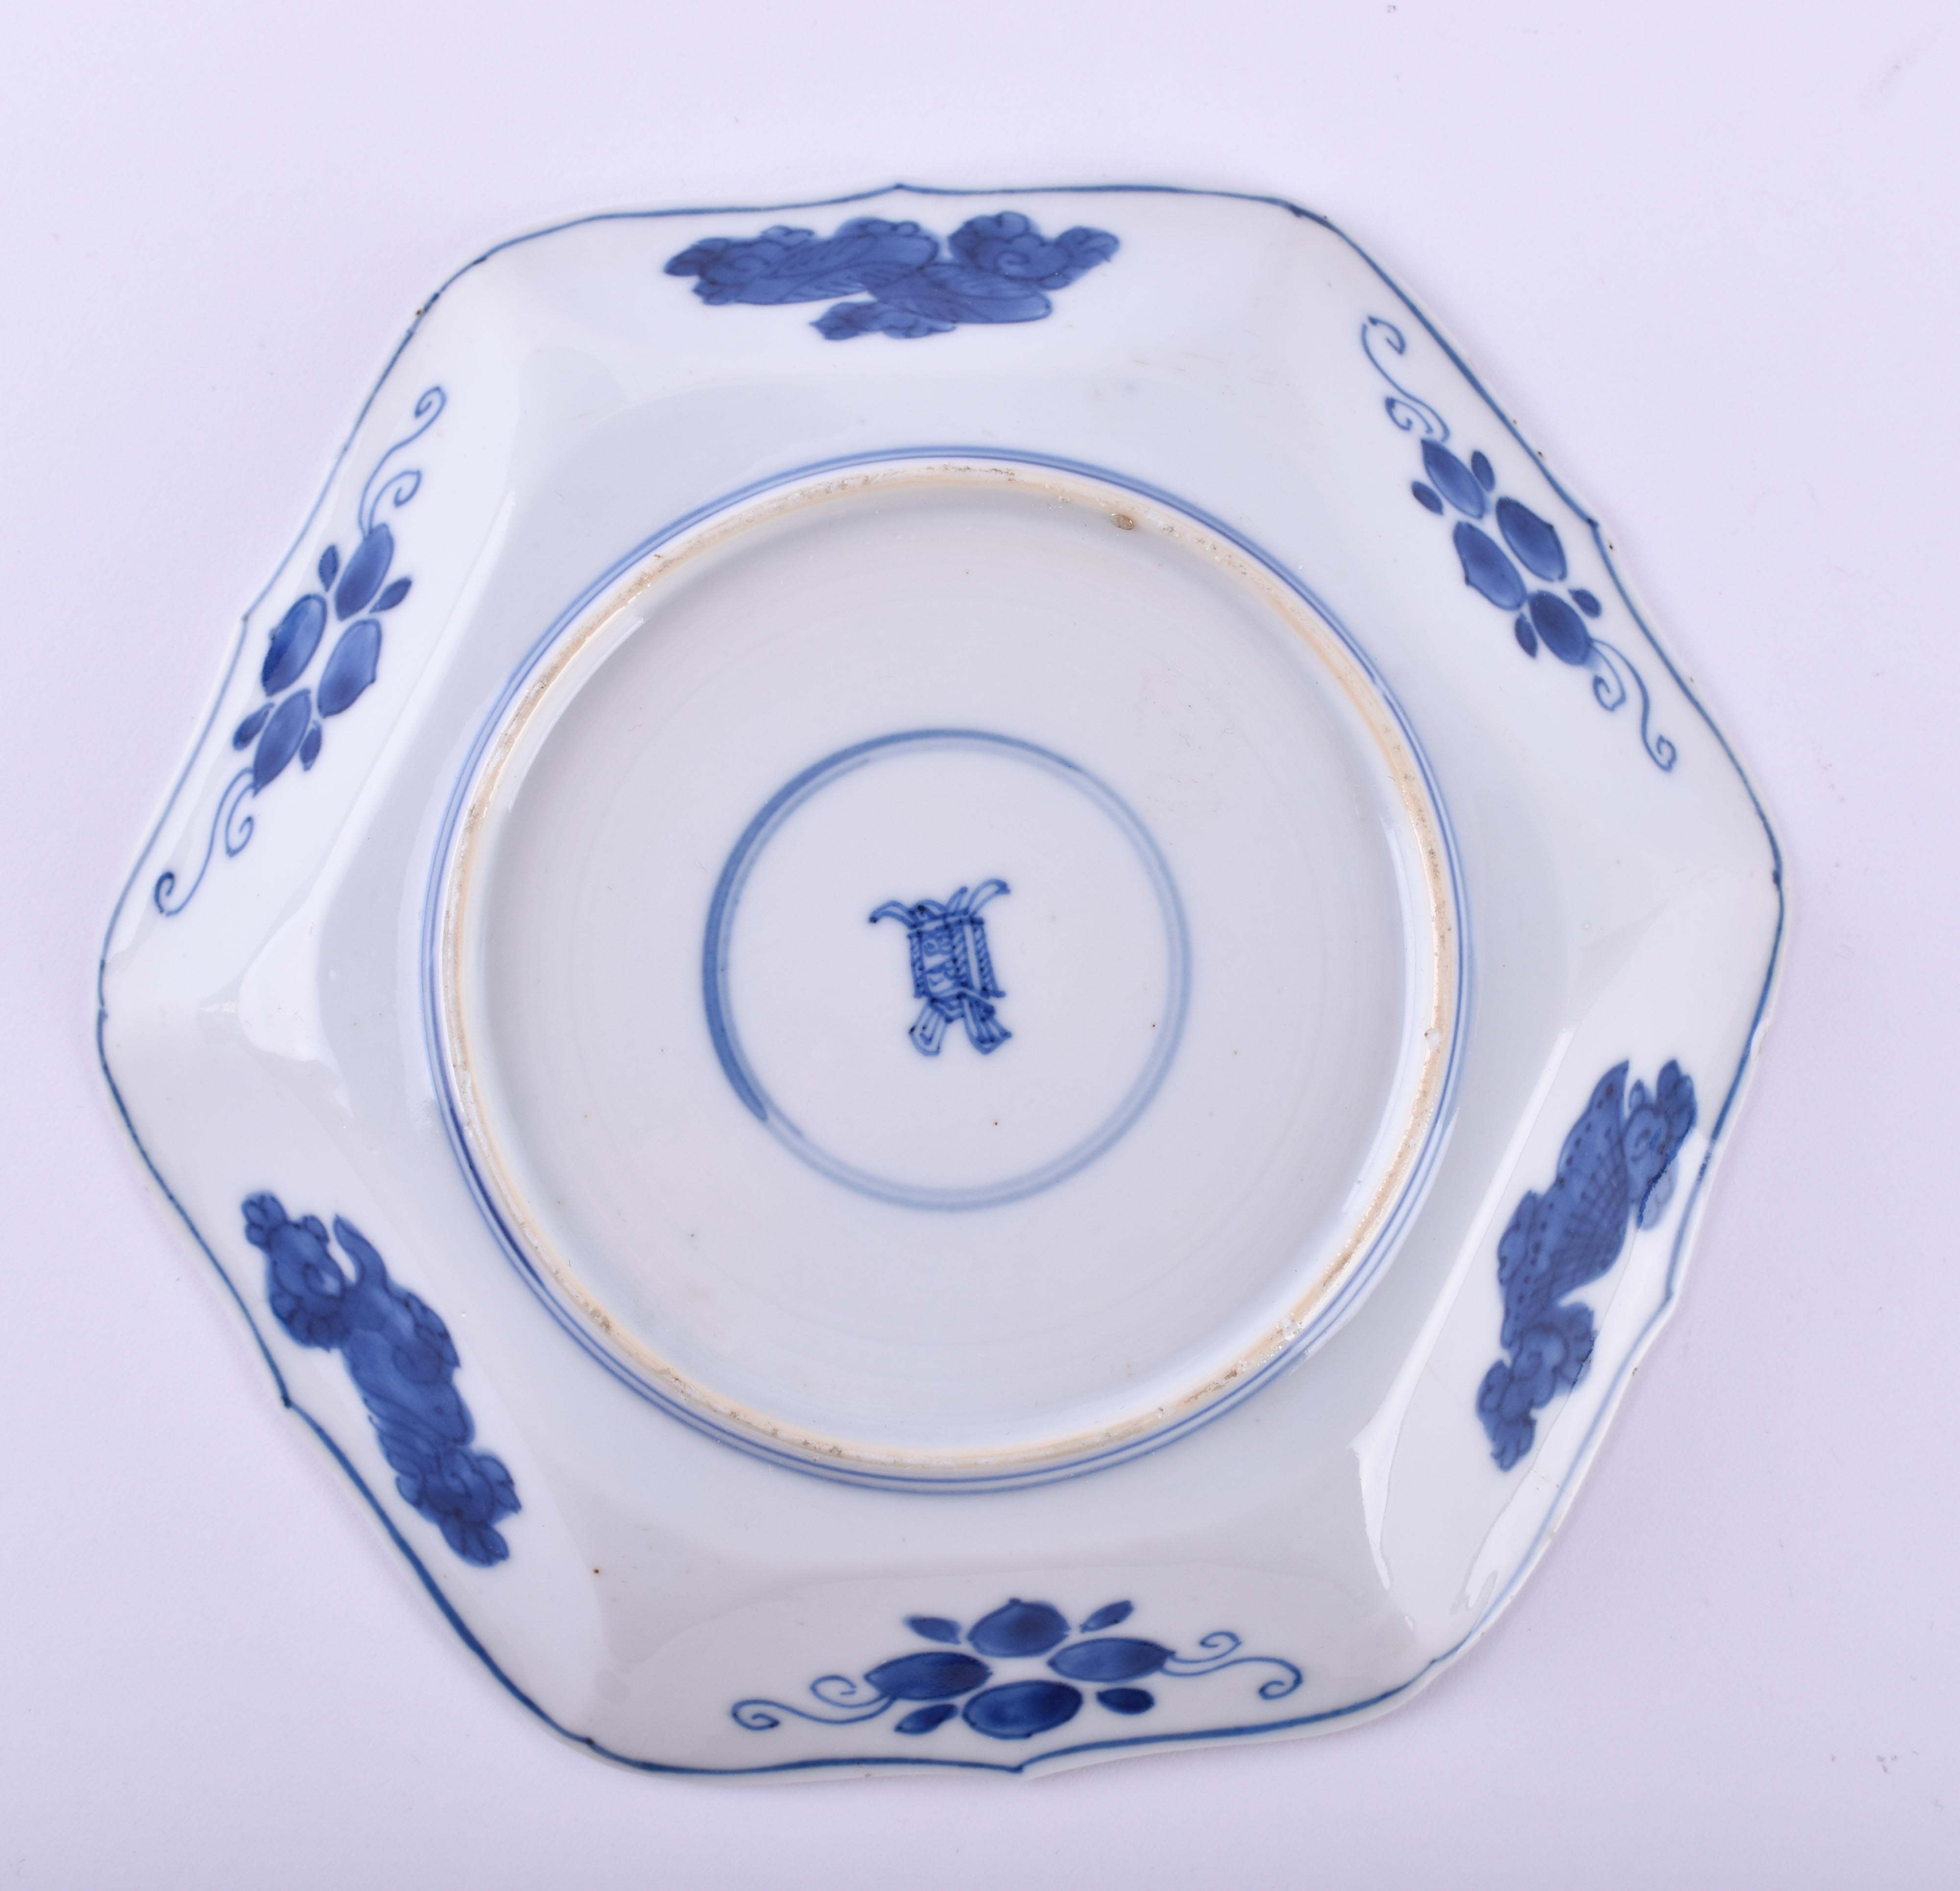  Bowl China Qing dynasty 17th / 18th century  - Image 7 of 8